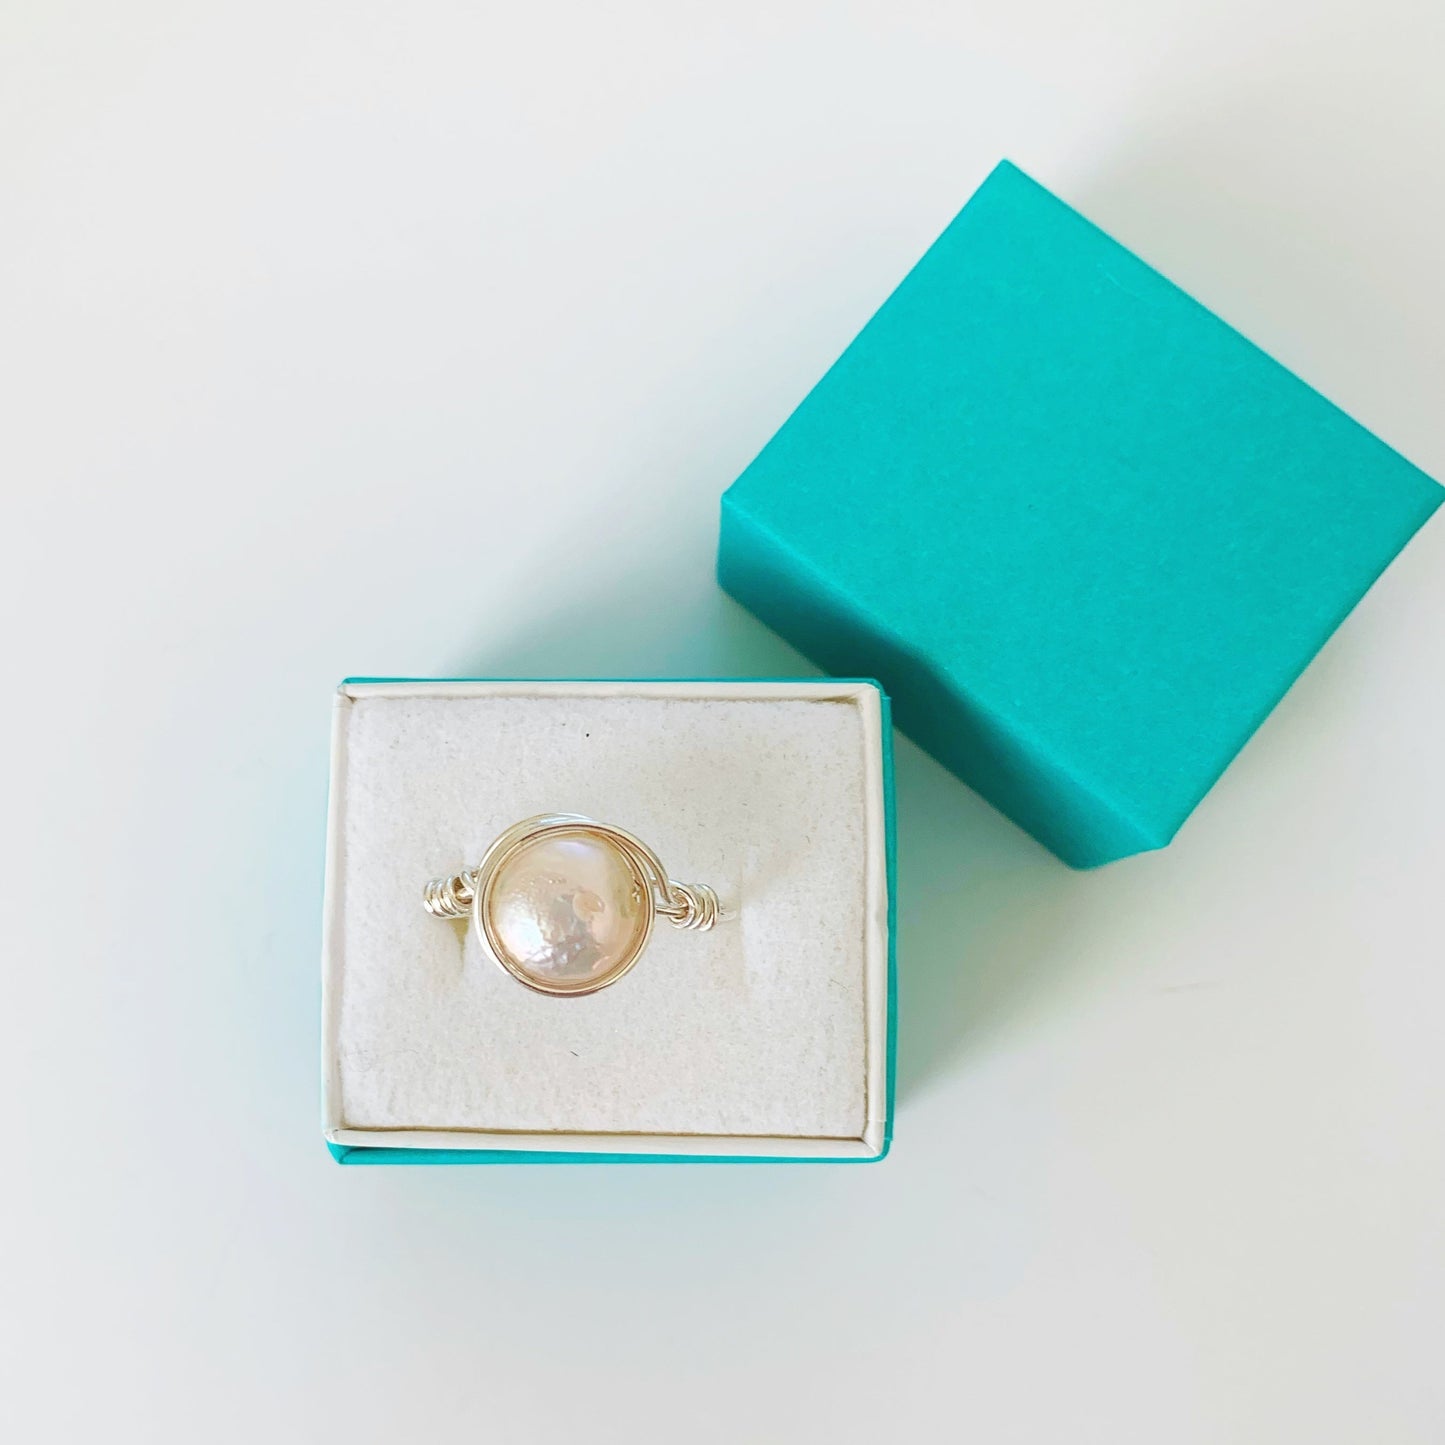 The newport pearl wire wrapped ring in sterling silver pictured in a teal ring box on a white surface